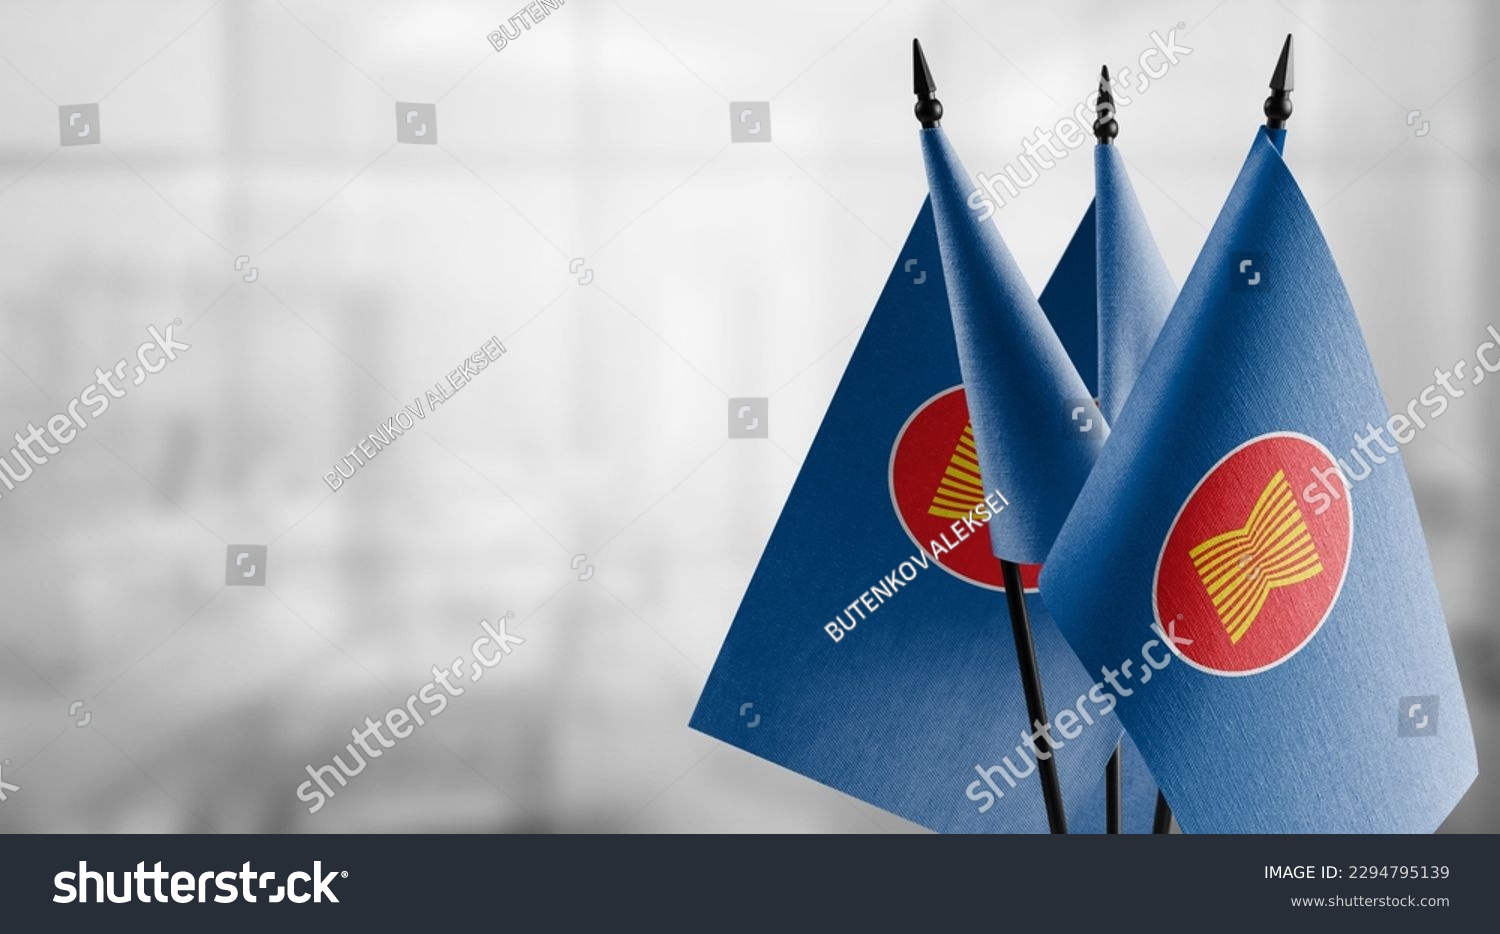 Small flags of the ASEAN on an abstract blurry background. #2294795139